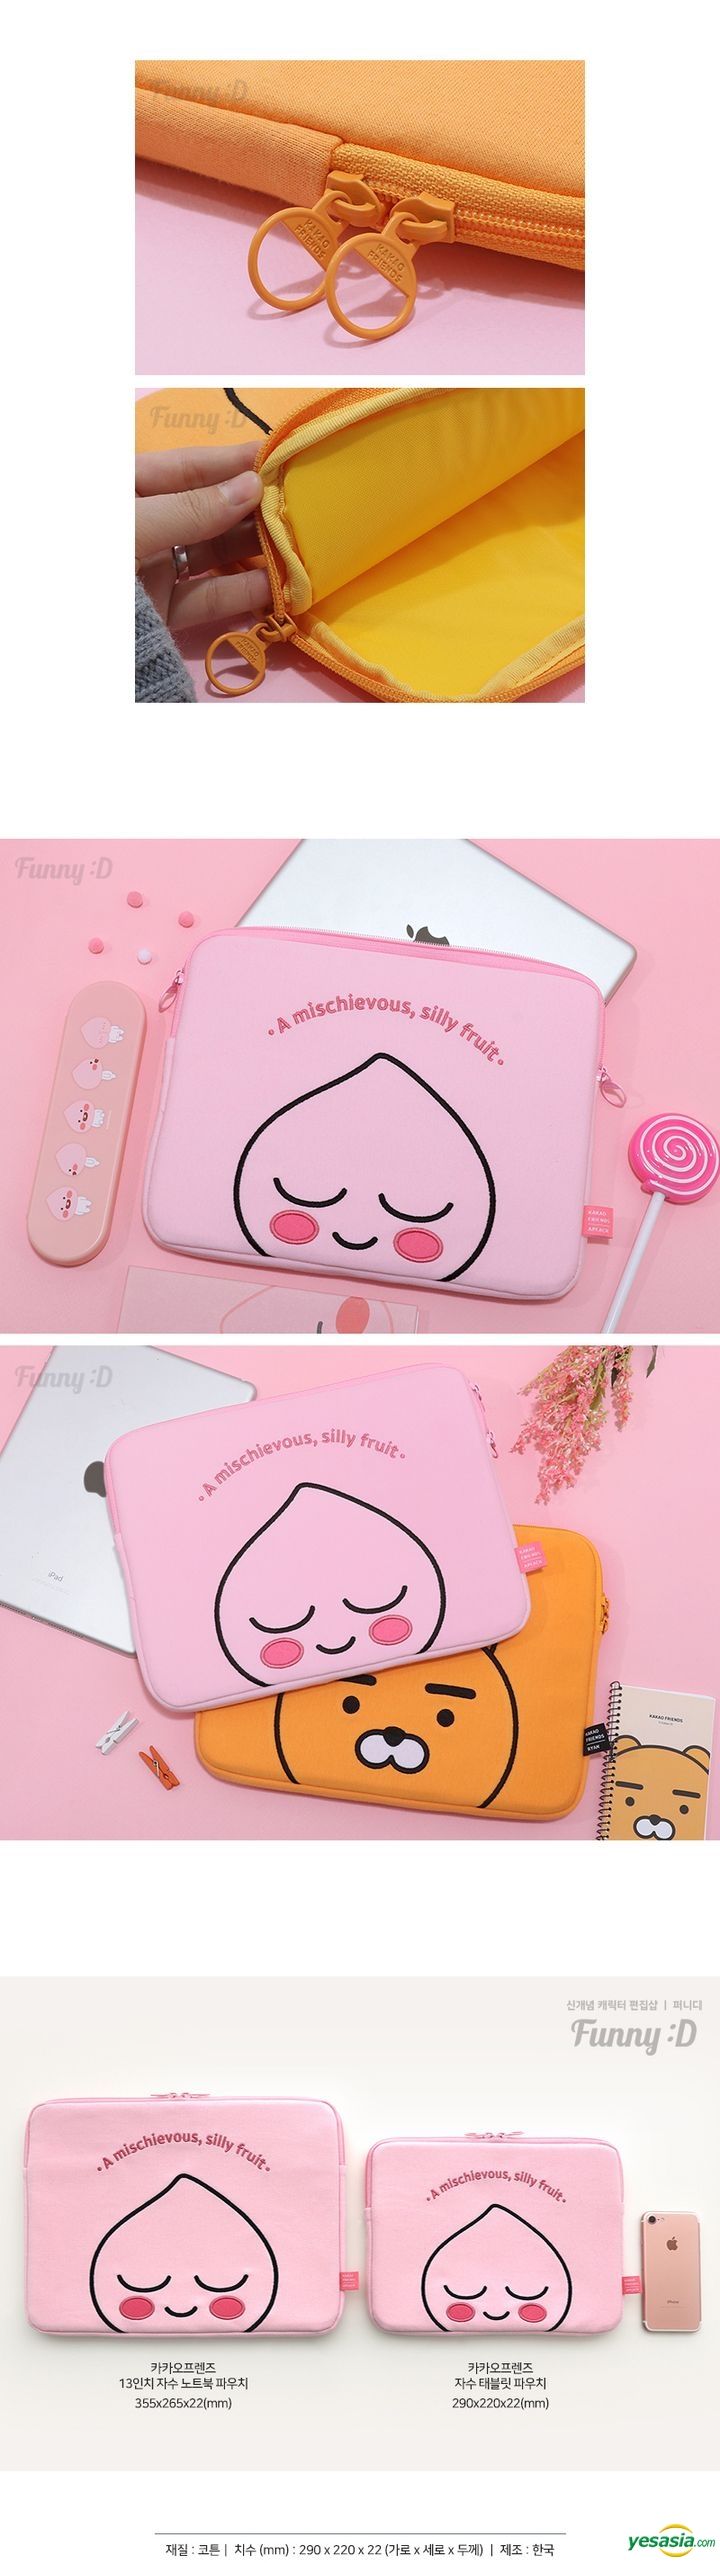 Yesasia Kakao Friends Tablet Pouch Apeach Photopostercelebrity Tsts Funnyd Toys 5685